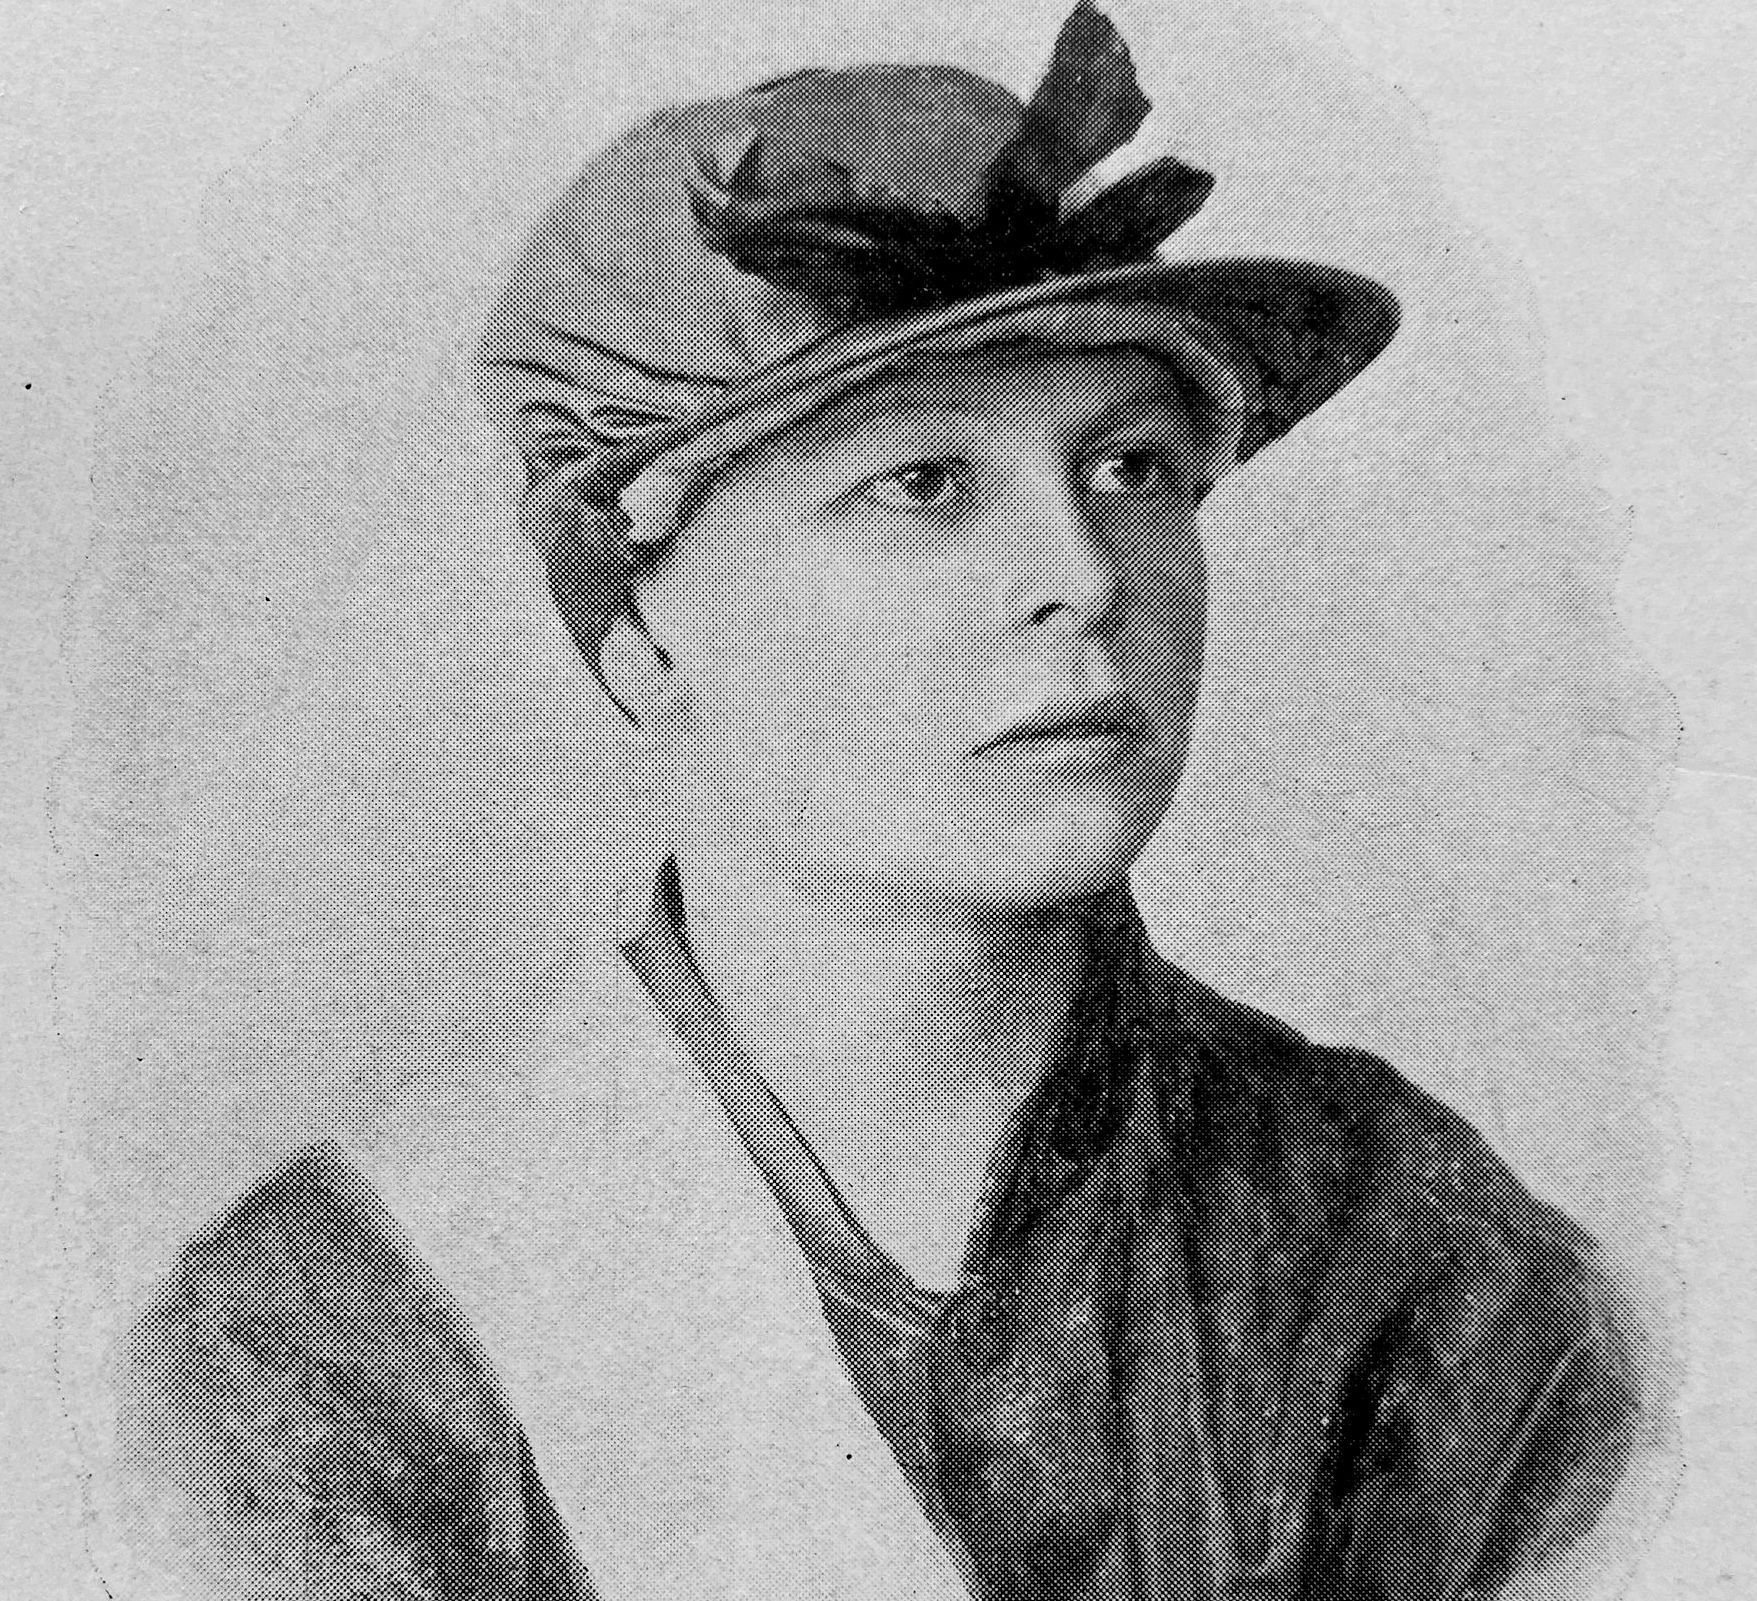 Winnie O'Connor, from "The American Turf" (Museum Collection)